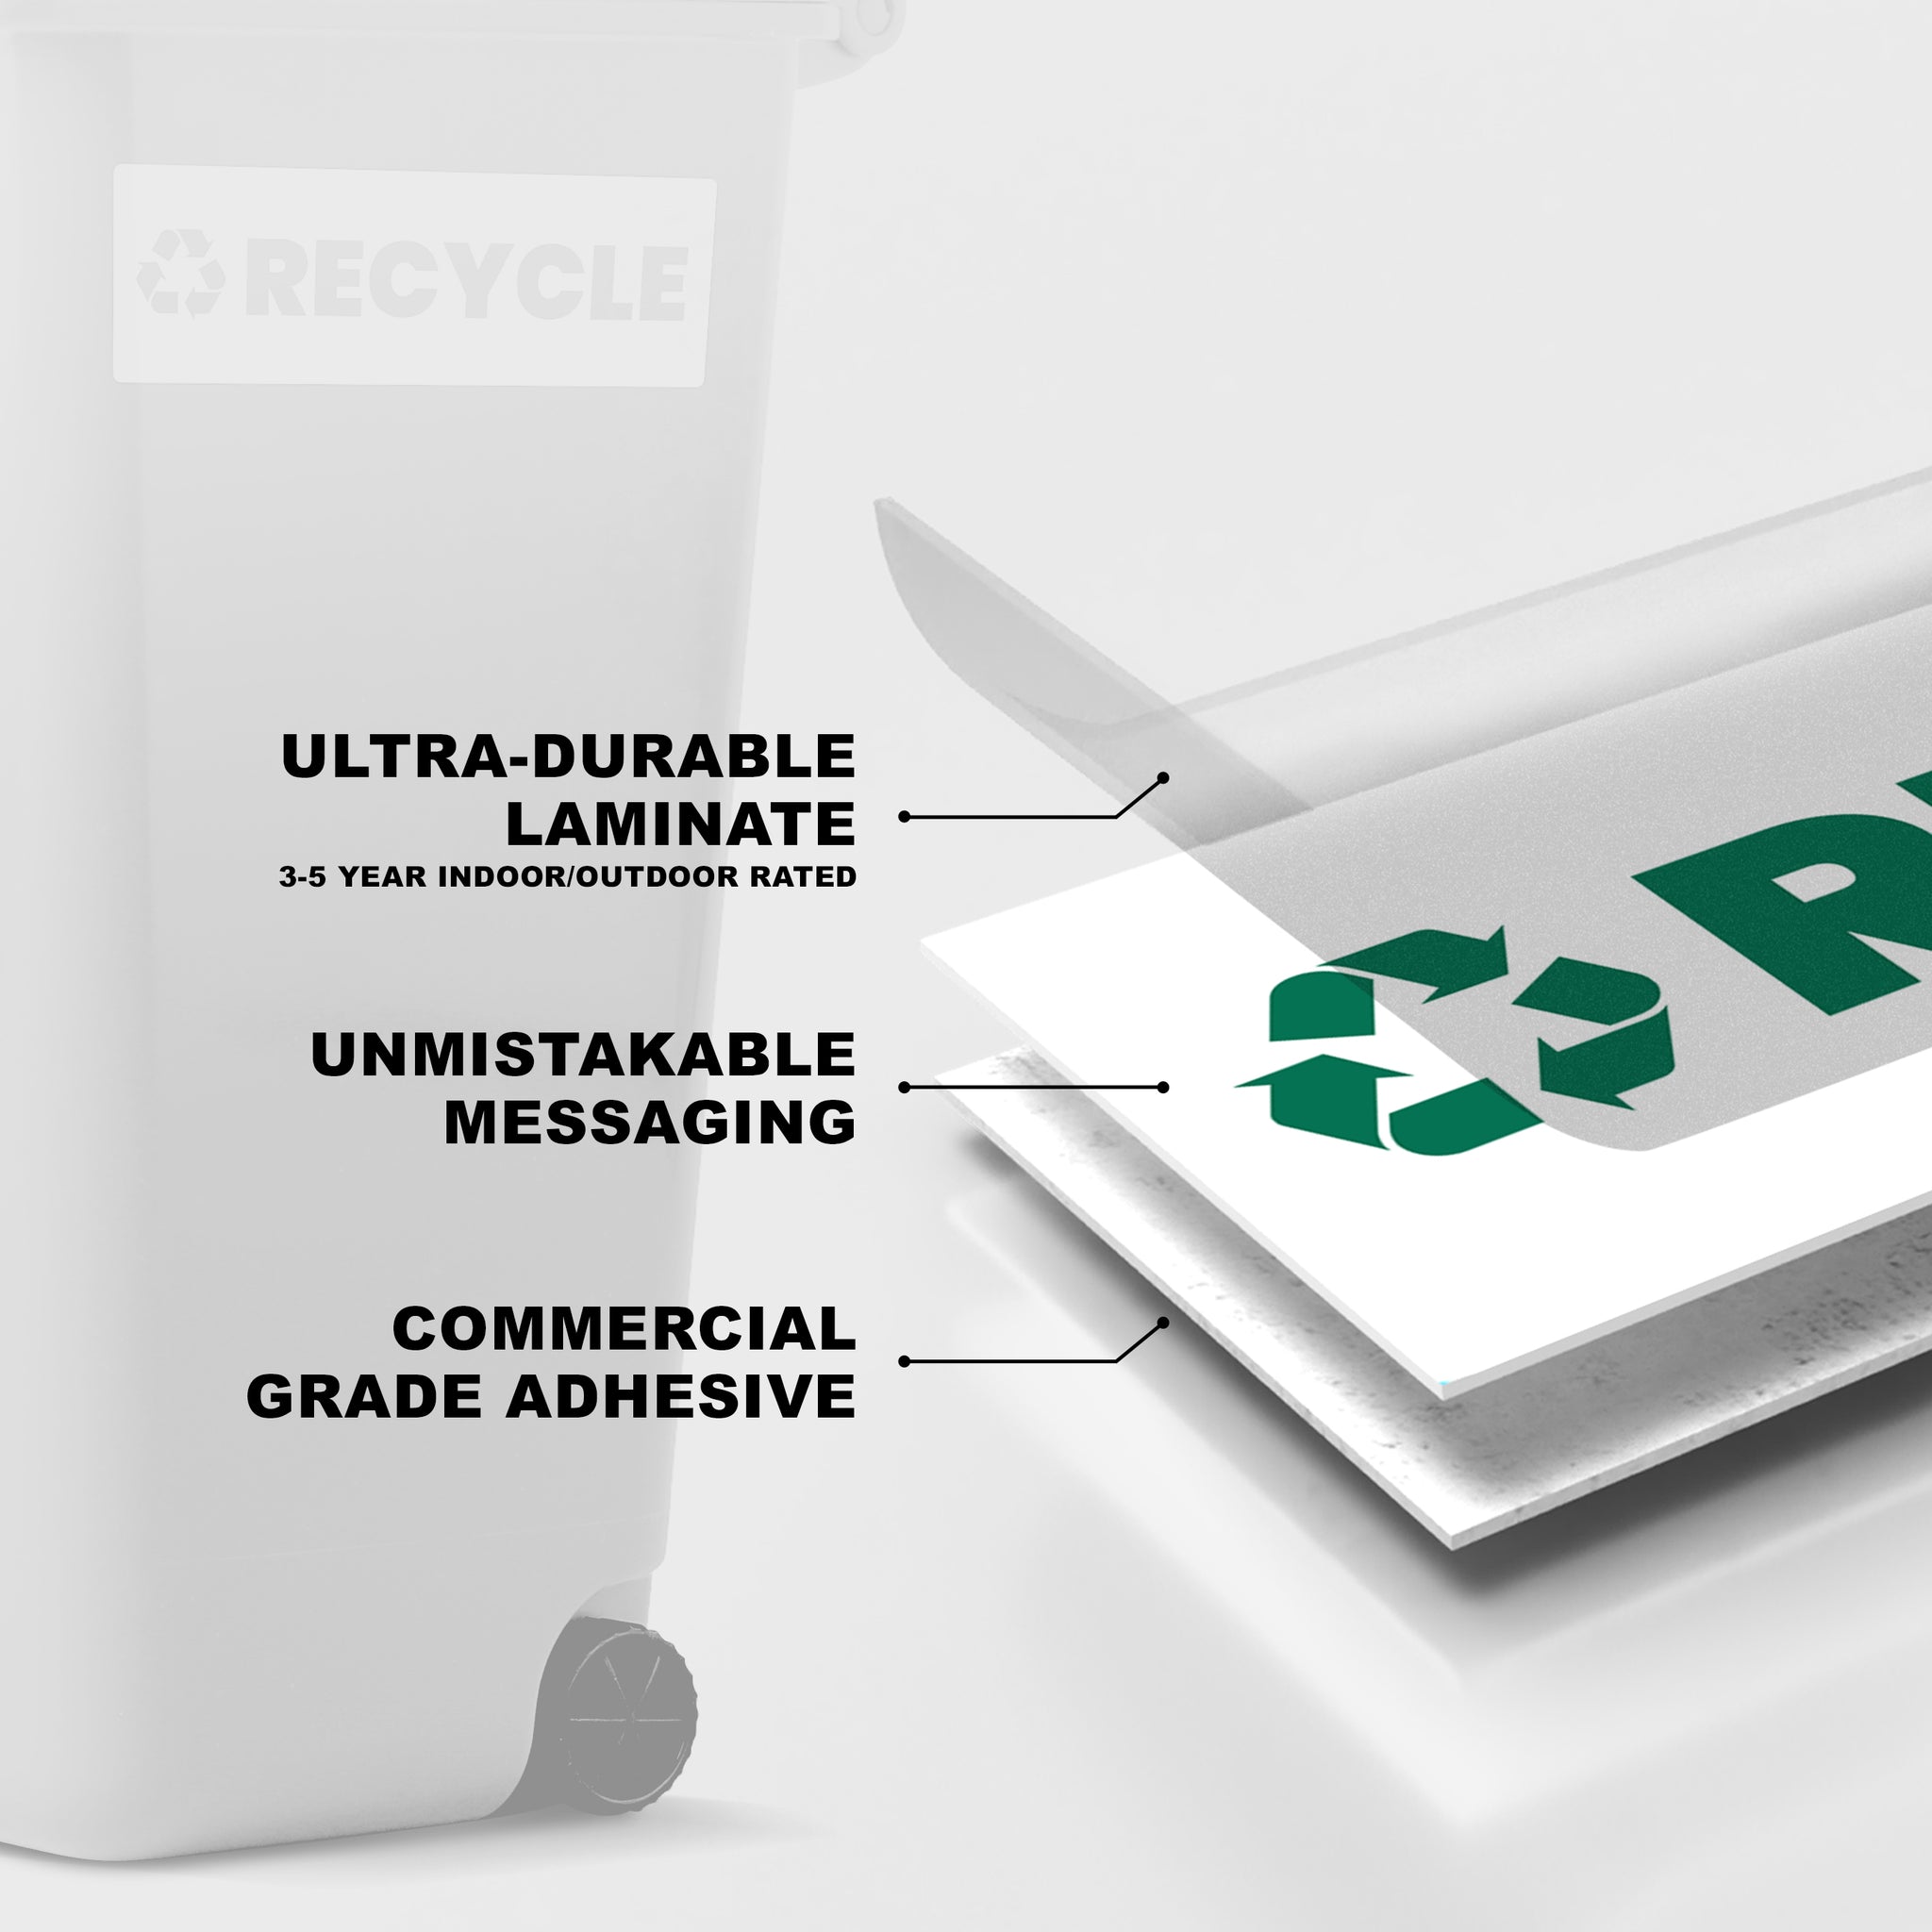 Recycle Sticker -  Trash Bin Labels for Commercial and Residential Use for Indoor/Outdoor, - by Fuel Stickers | 2"x6" | 4 Pack